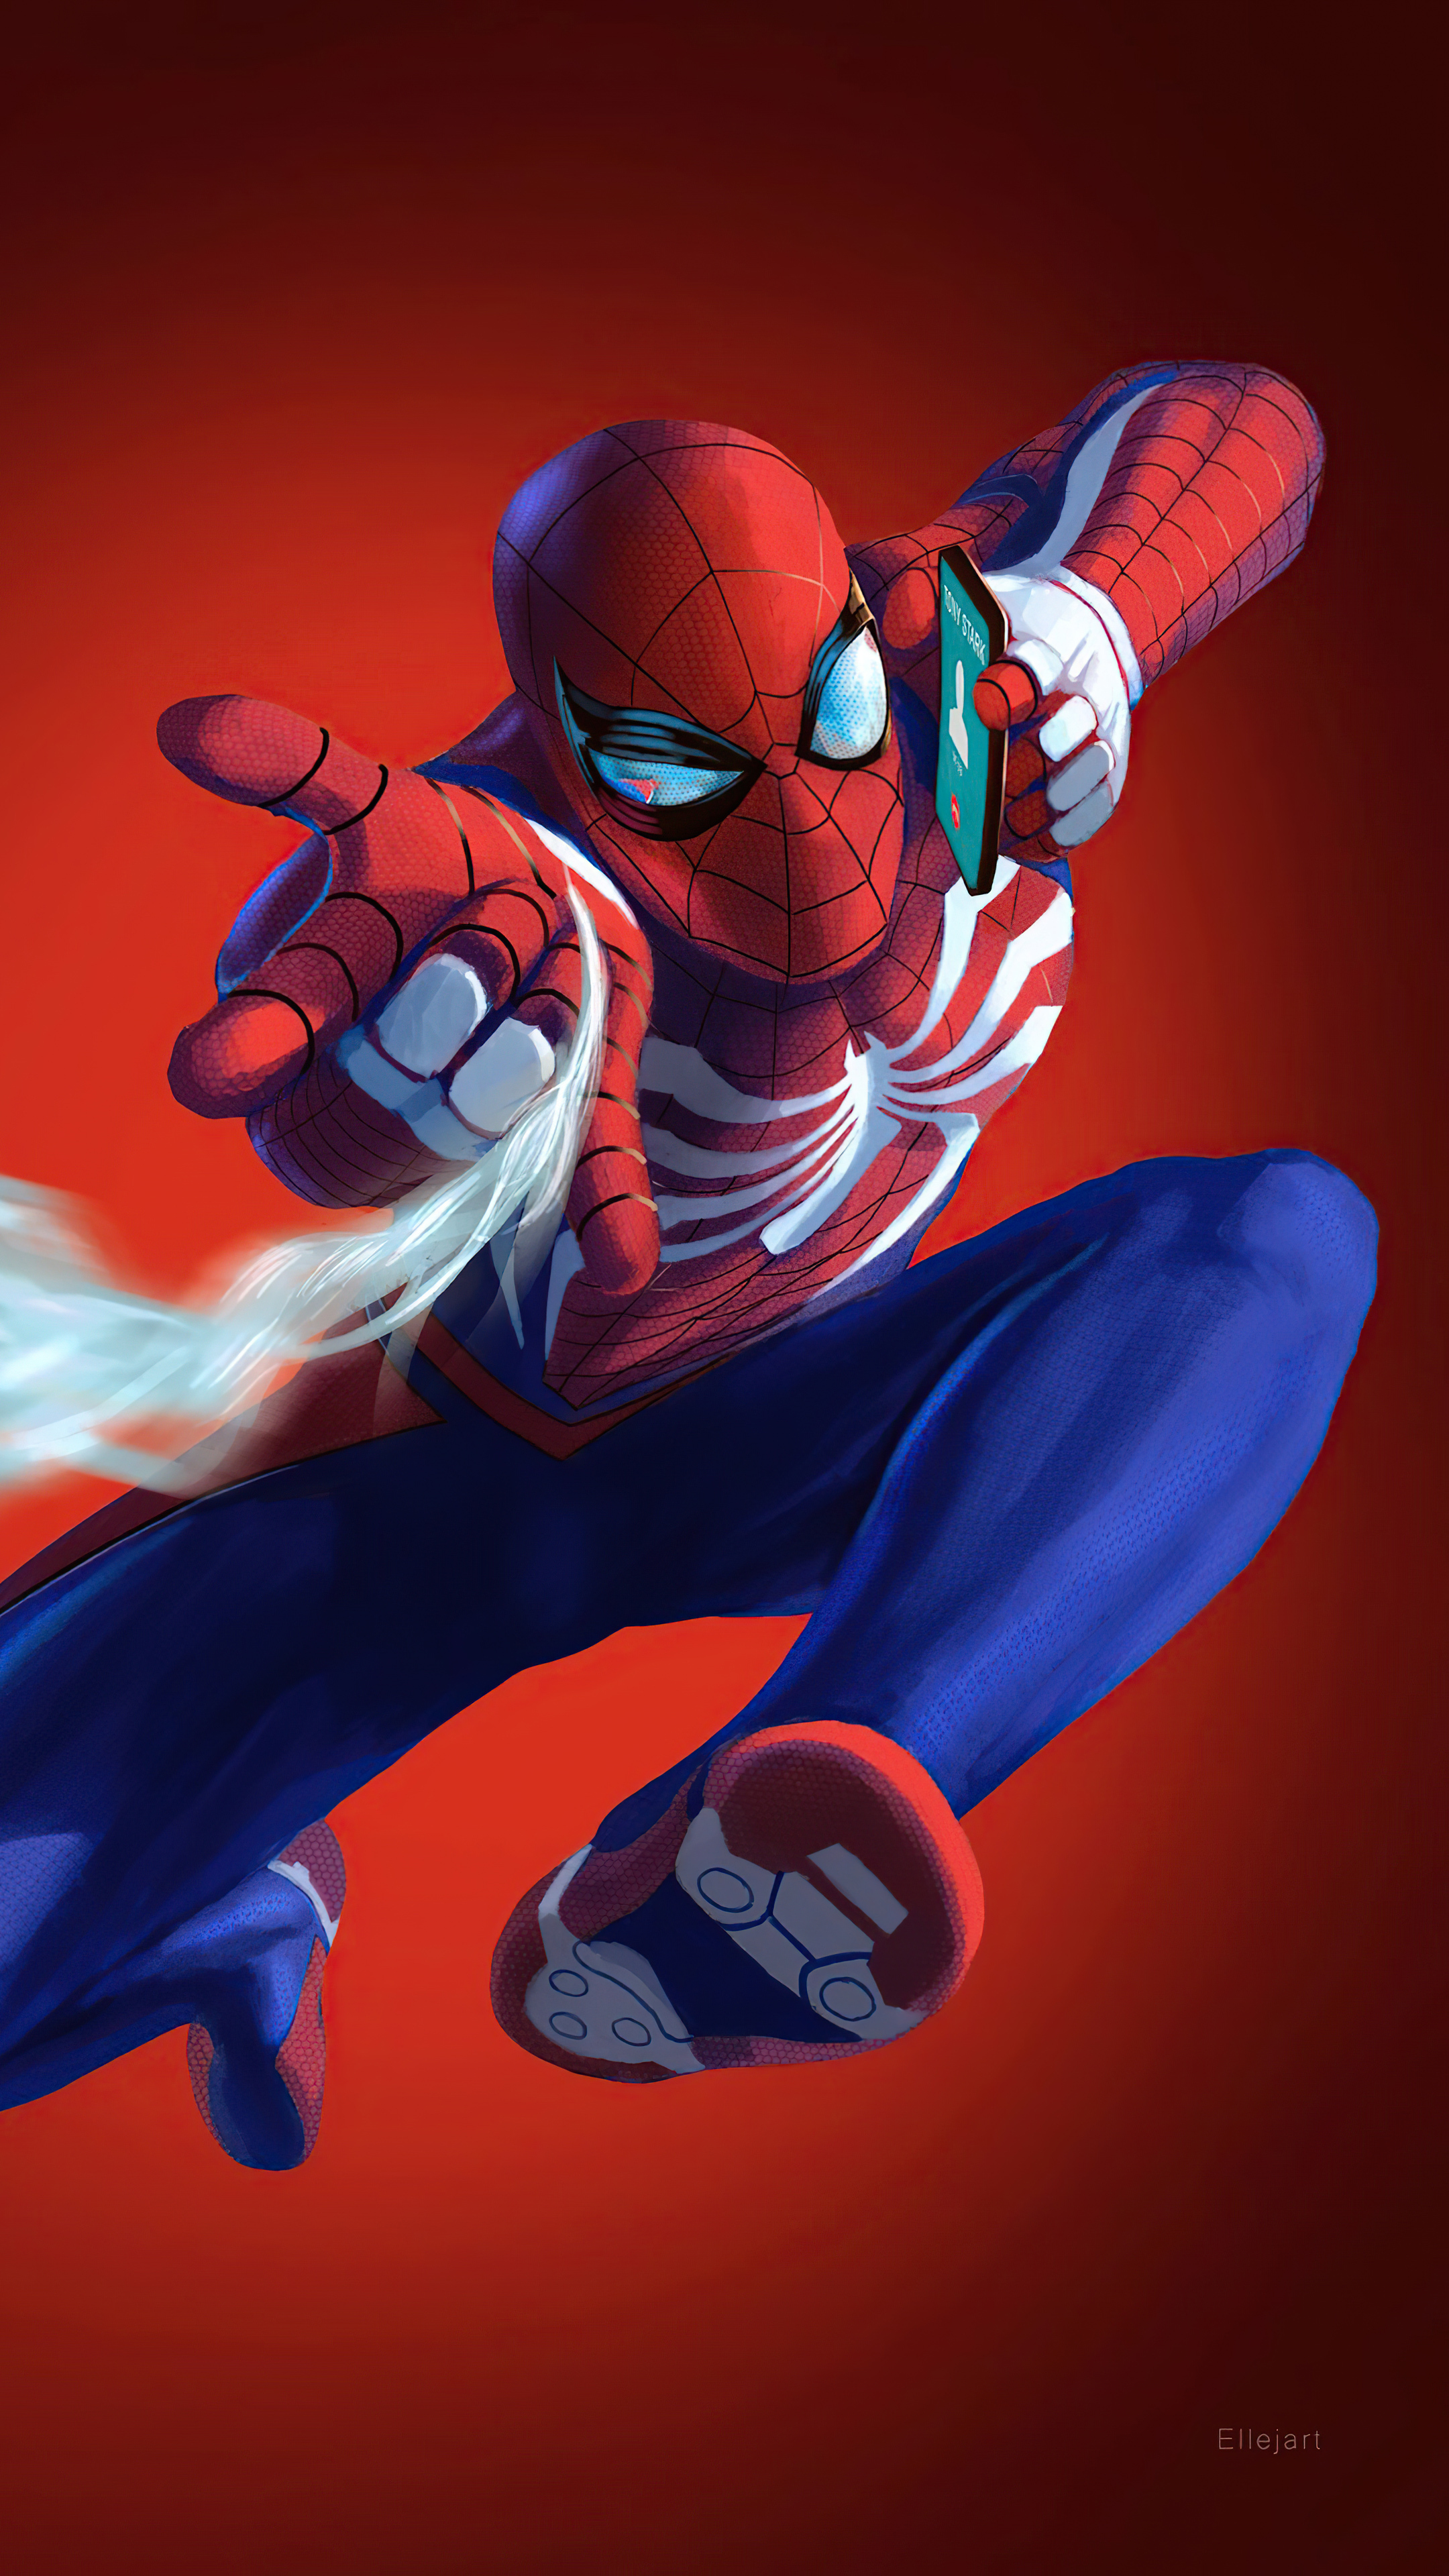 2160x3840 Spiderman On Phone 4k Sony Xperia X,XZ,Z5 Premium HD 4k Wallpapers,  Images, Backgrounds, Photos and Pictures